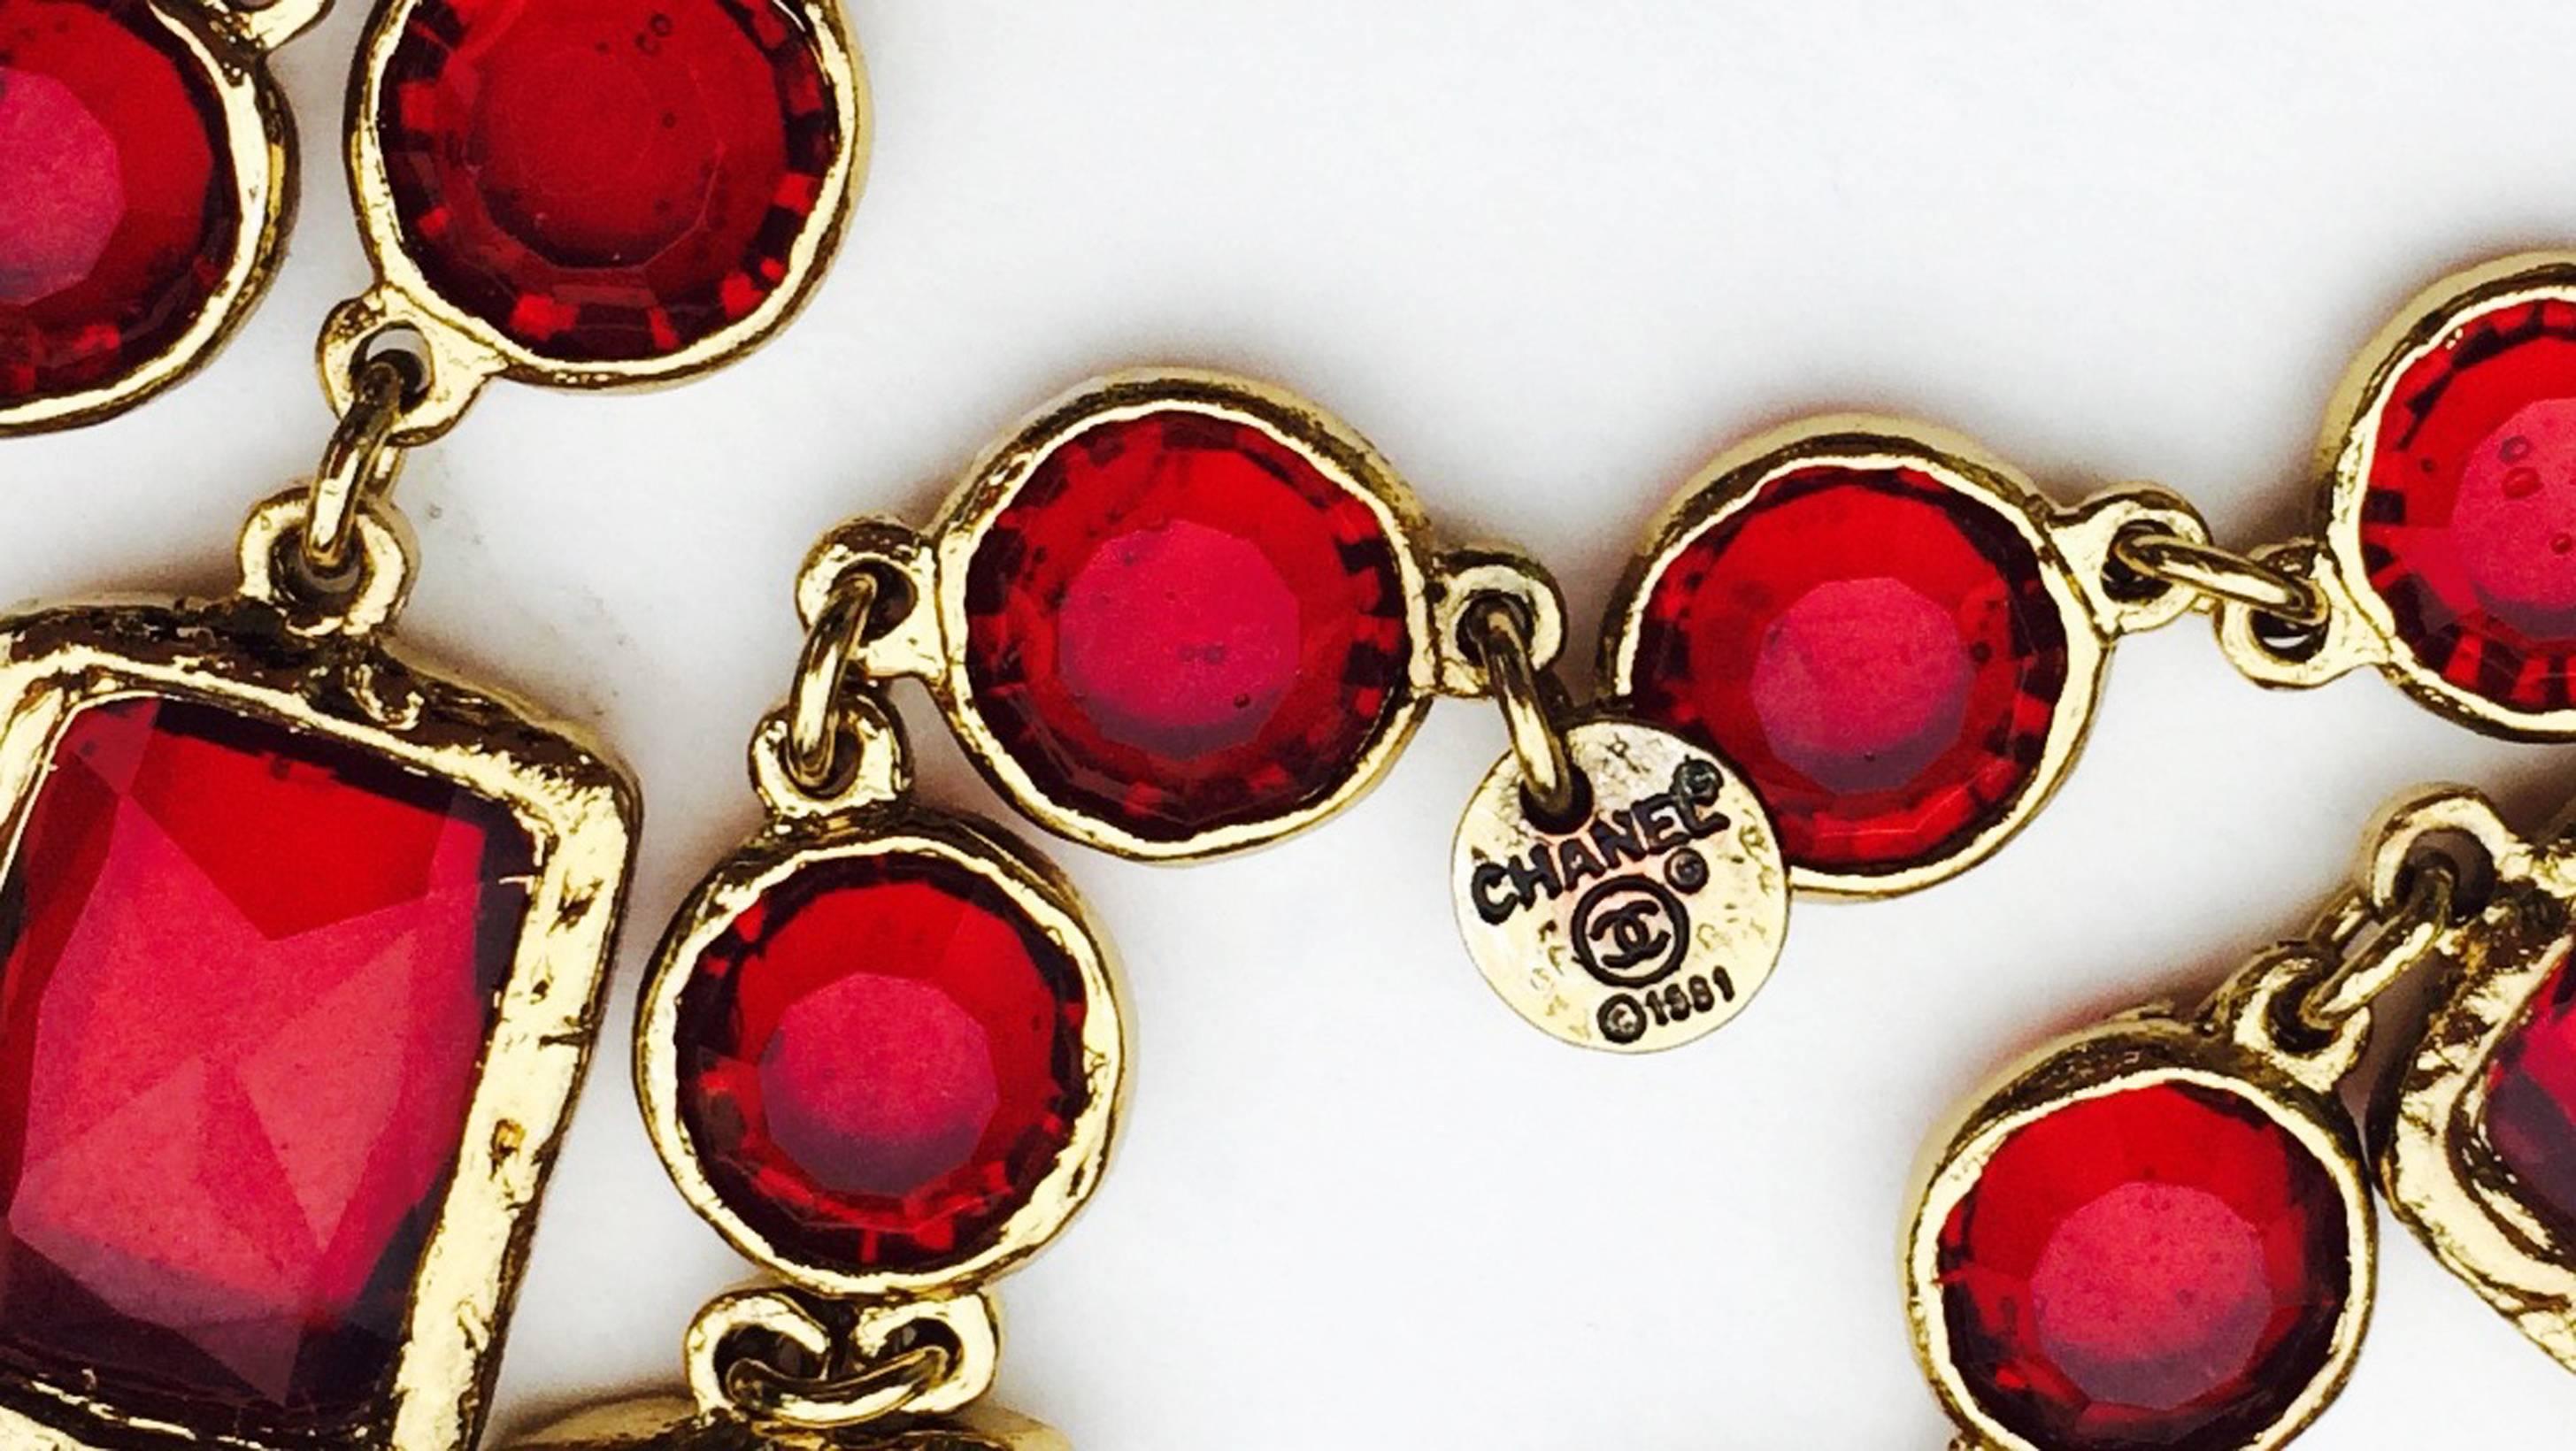 A fine vintage Chanel red crystal sautoir necklace. Authentic signed gilt metal link item features both 